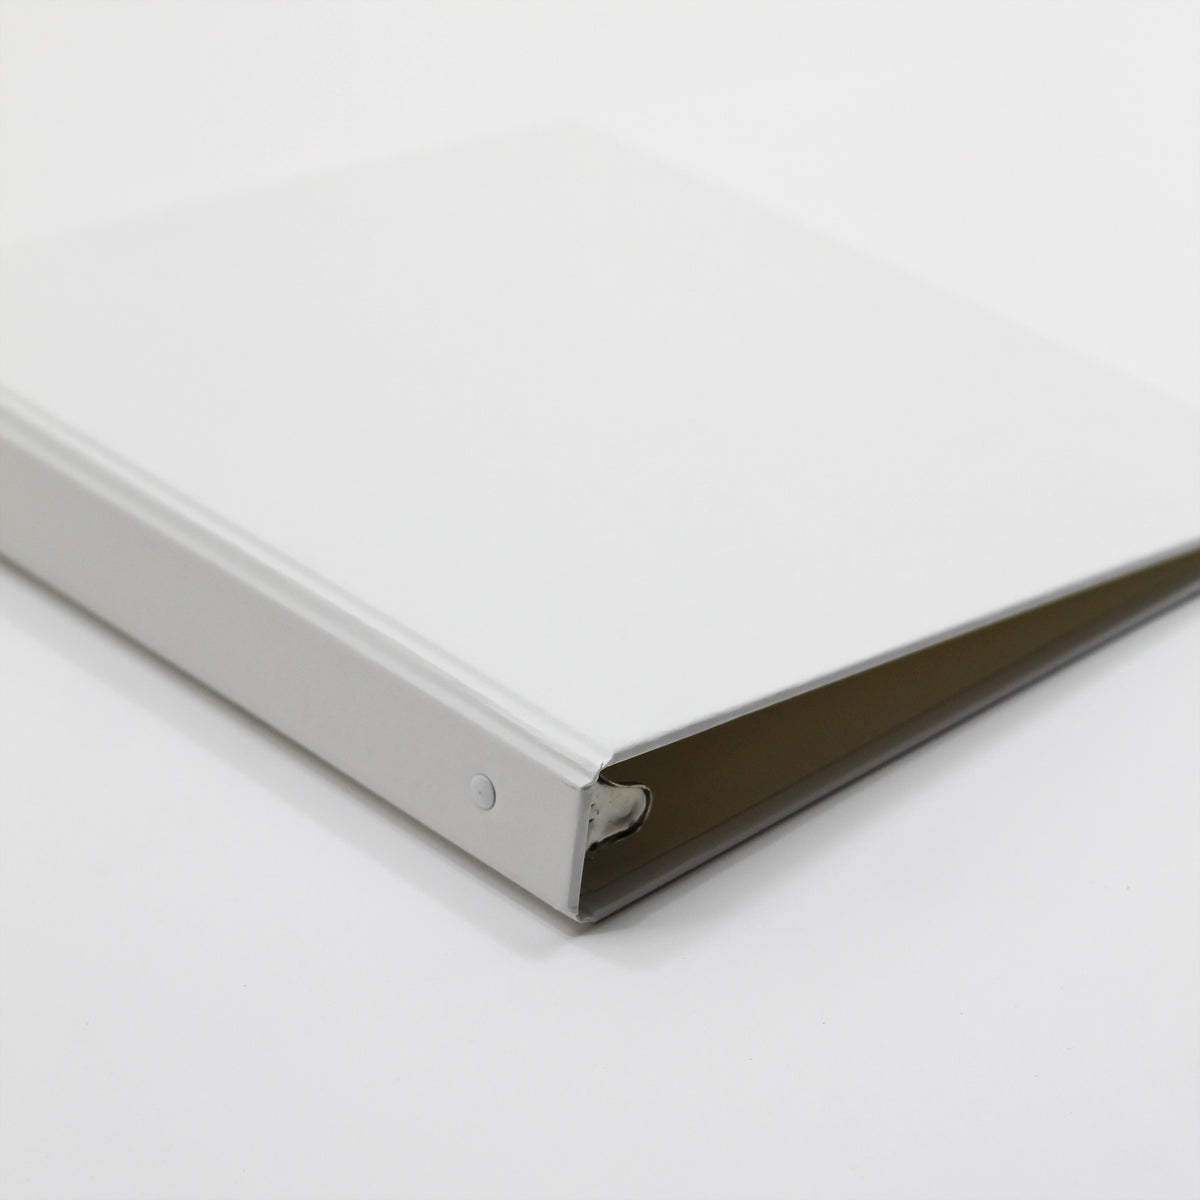 Photo Binder (for 5x7 photos) with White Vegan Leather